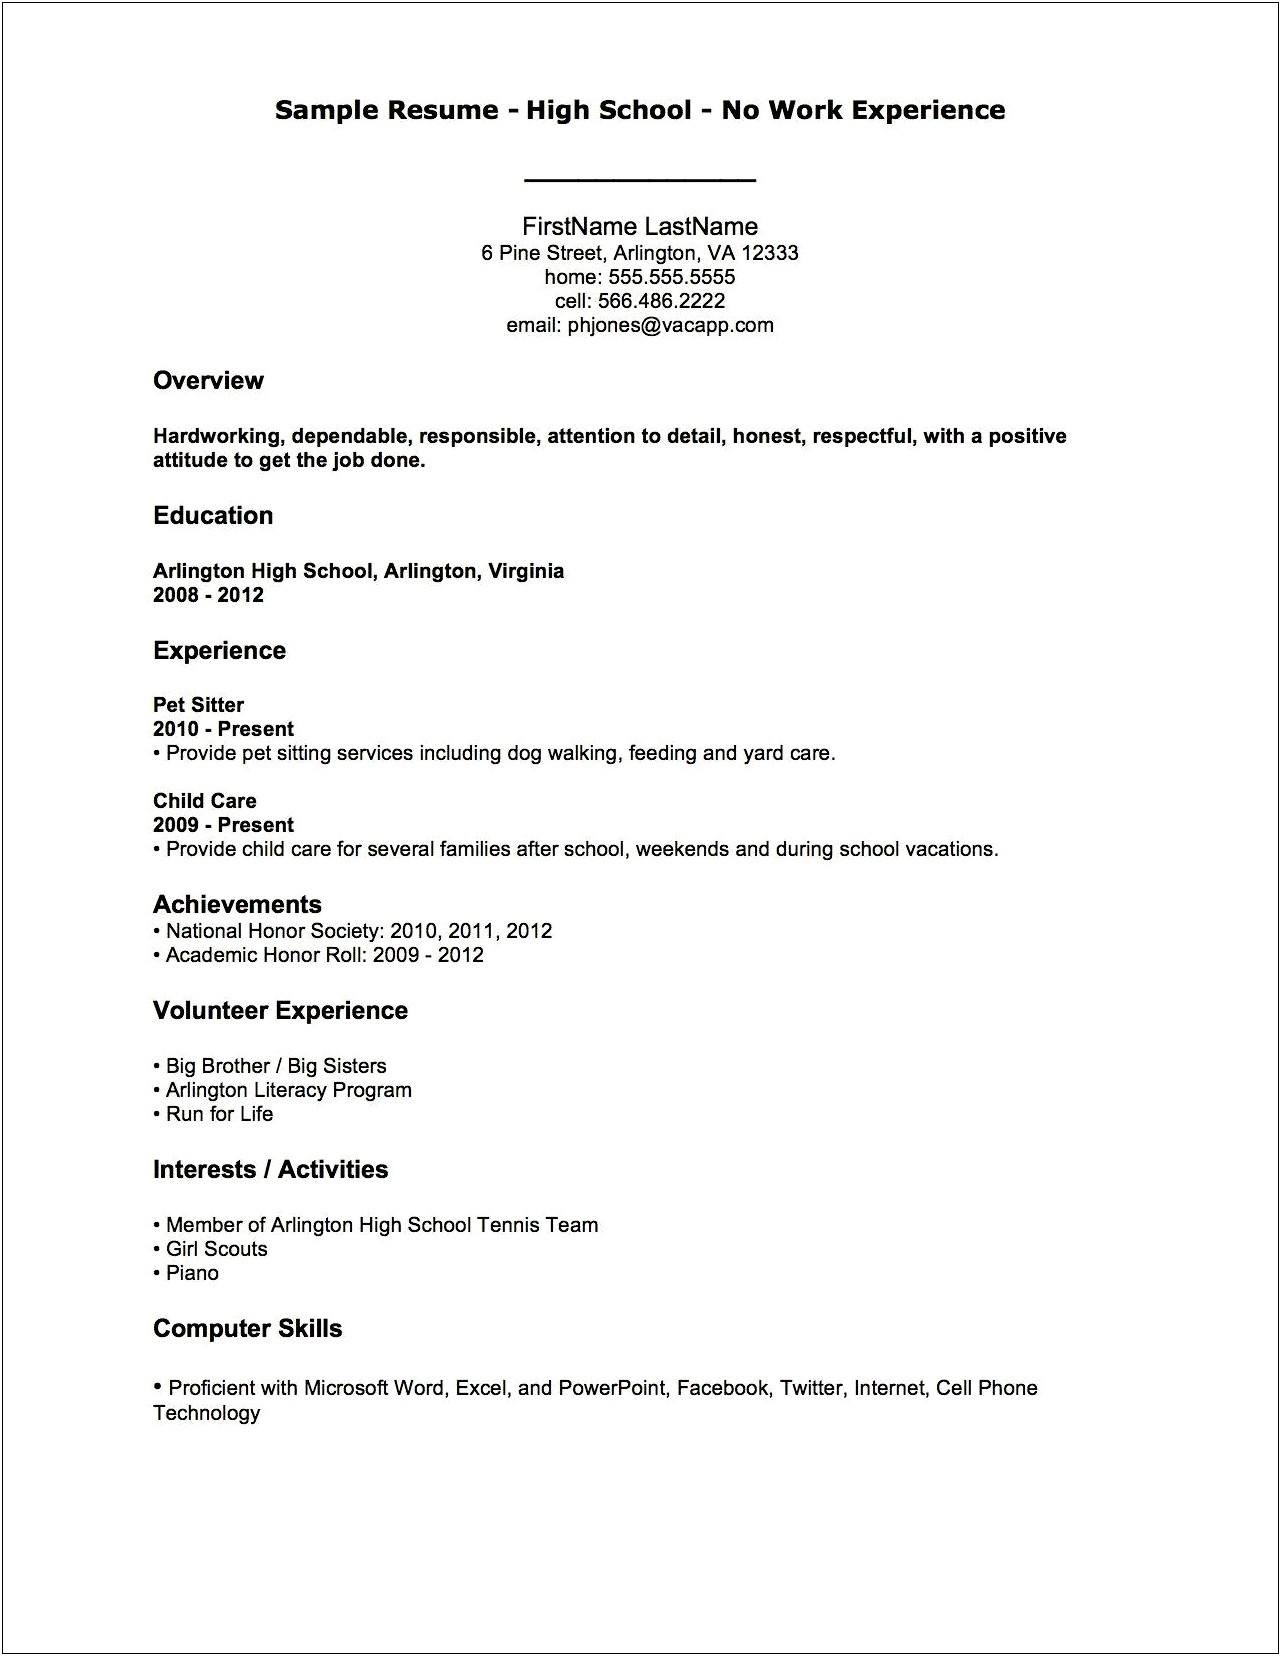 Sample Job Resume Without Work Experience